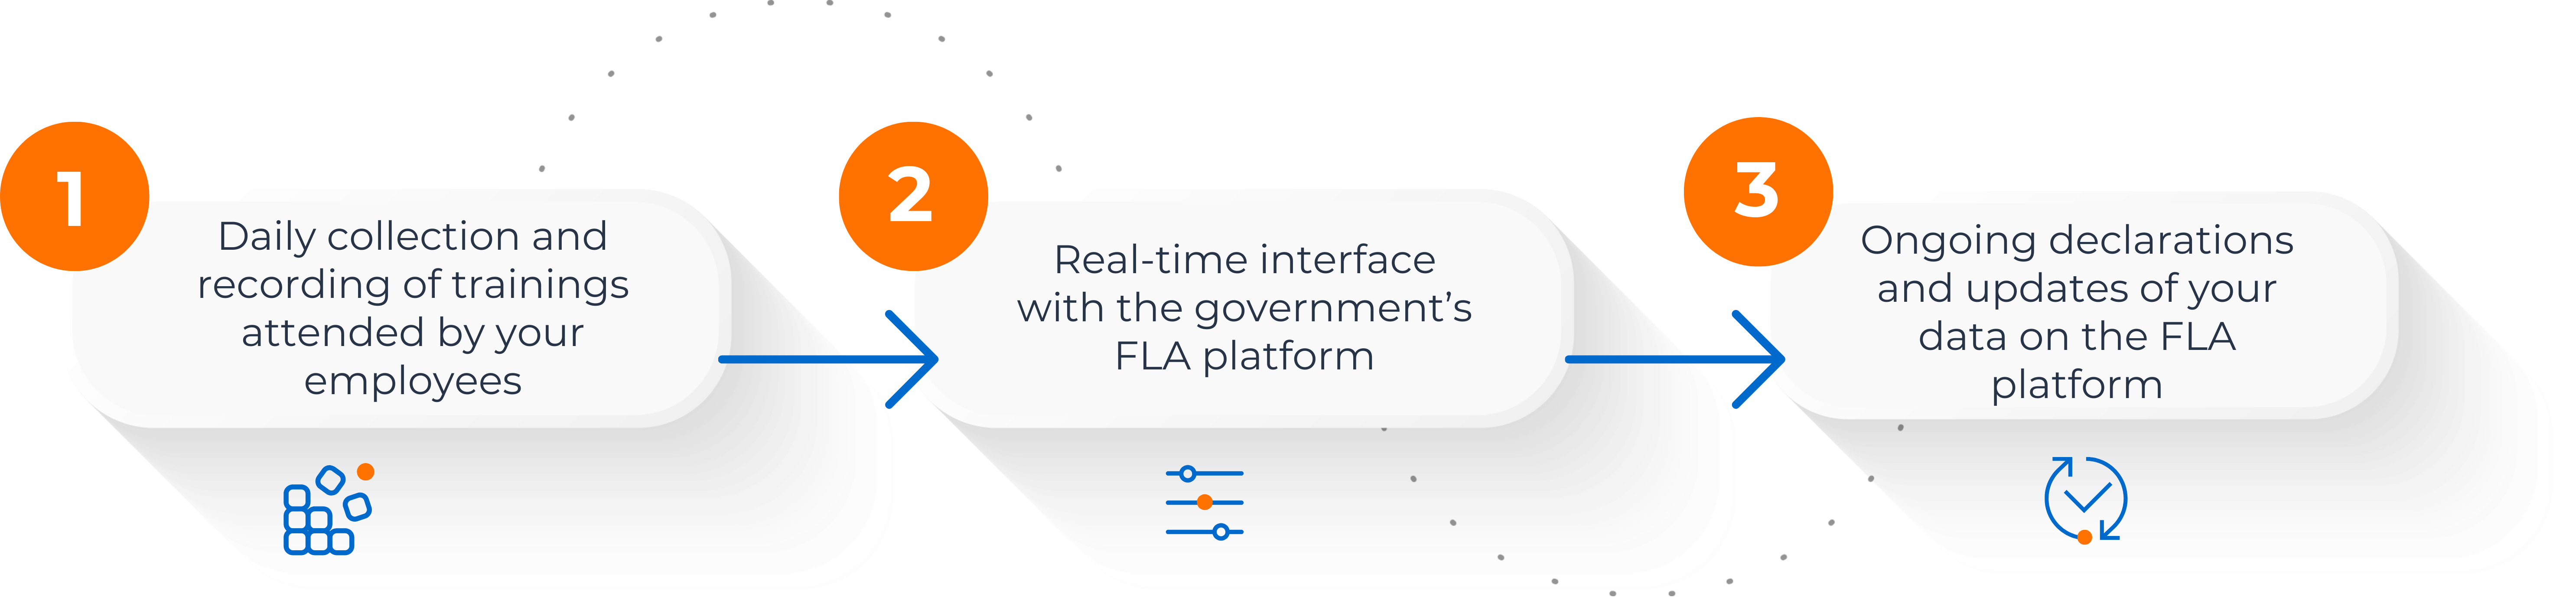 1 - Daily collection and recording of trainings attended by your employees 2 - Real-time interface with the government’s FLA platform 3 - Ongoing declarations and updates of your data on the FLA platform